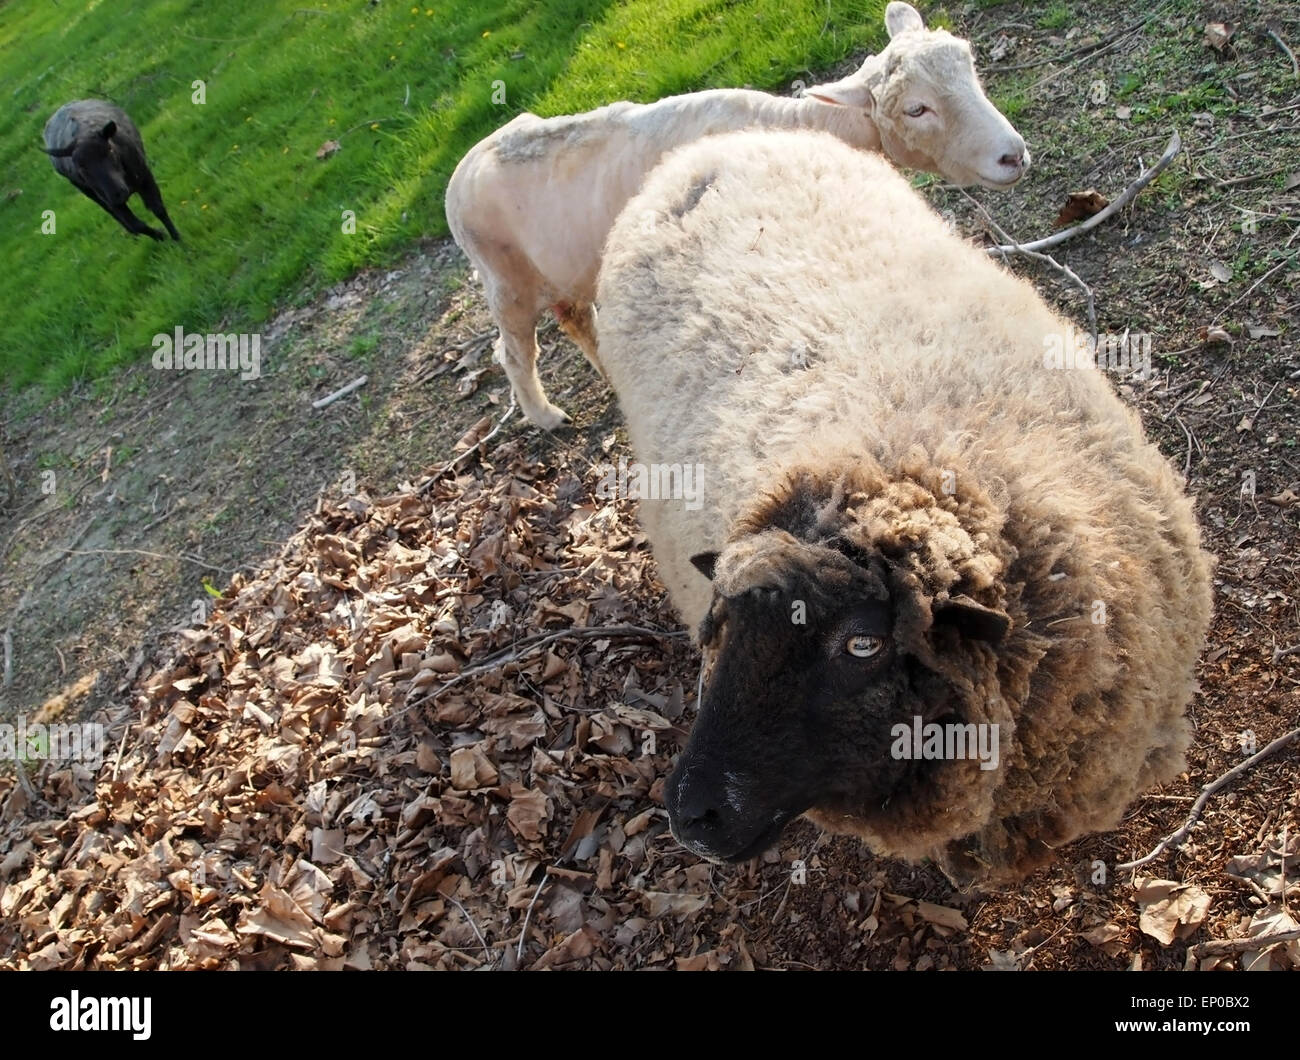 Looking down at a sheep in a meadow, who is gazing casually with one sparkling eye. Stock Photo